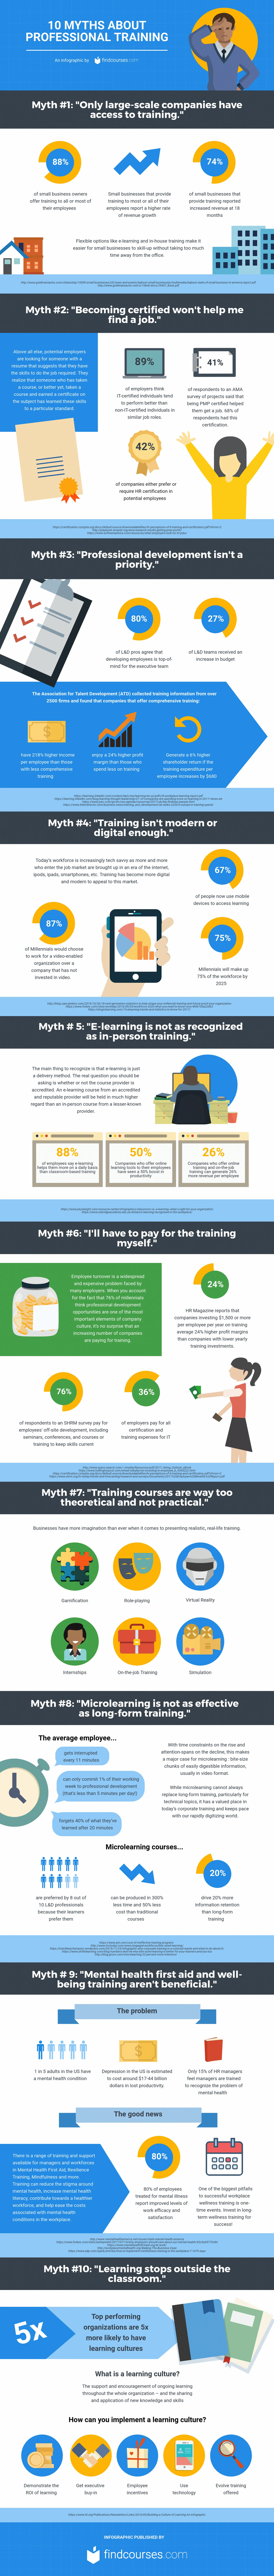 infographic on professional training